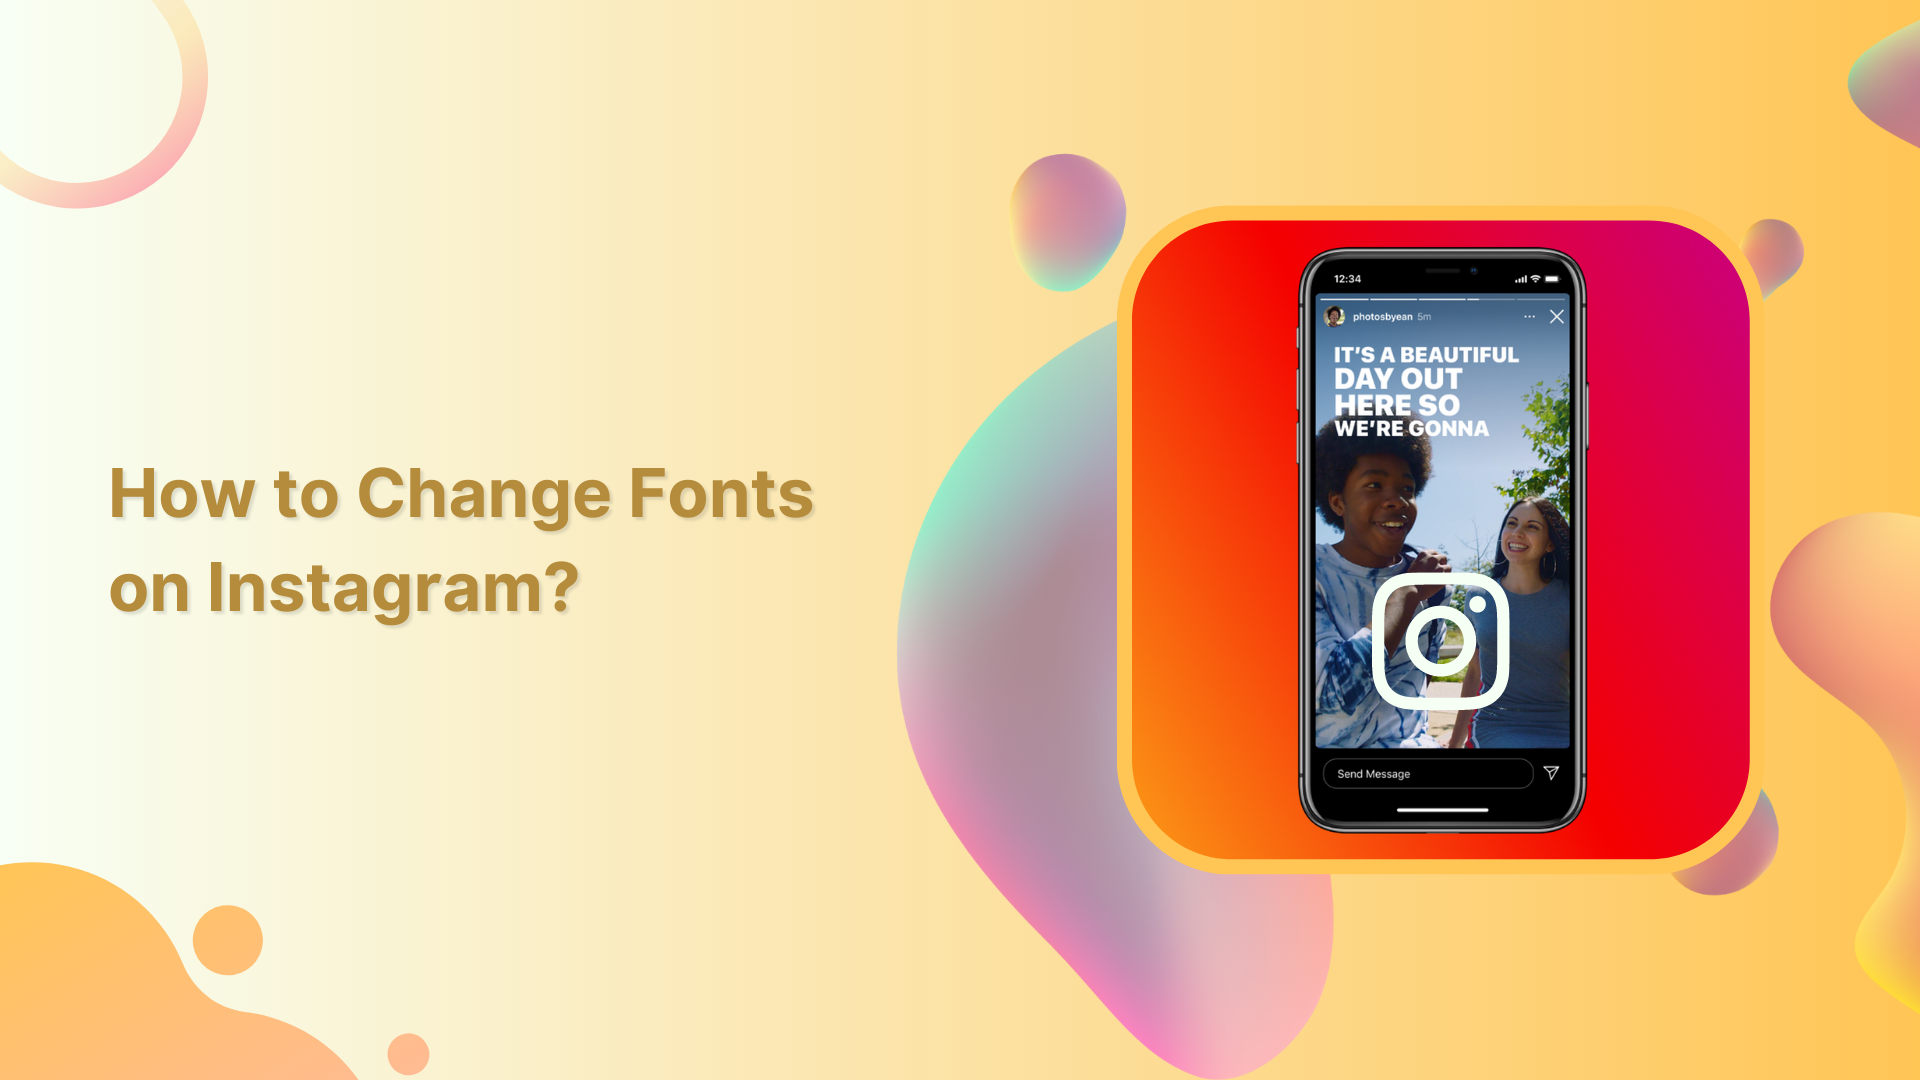 How to change fonts on Instagram